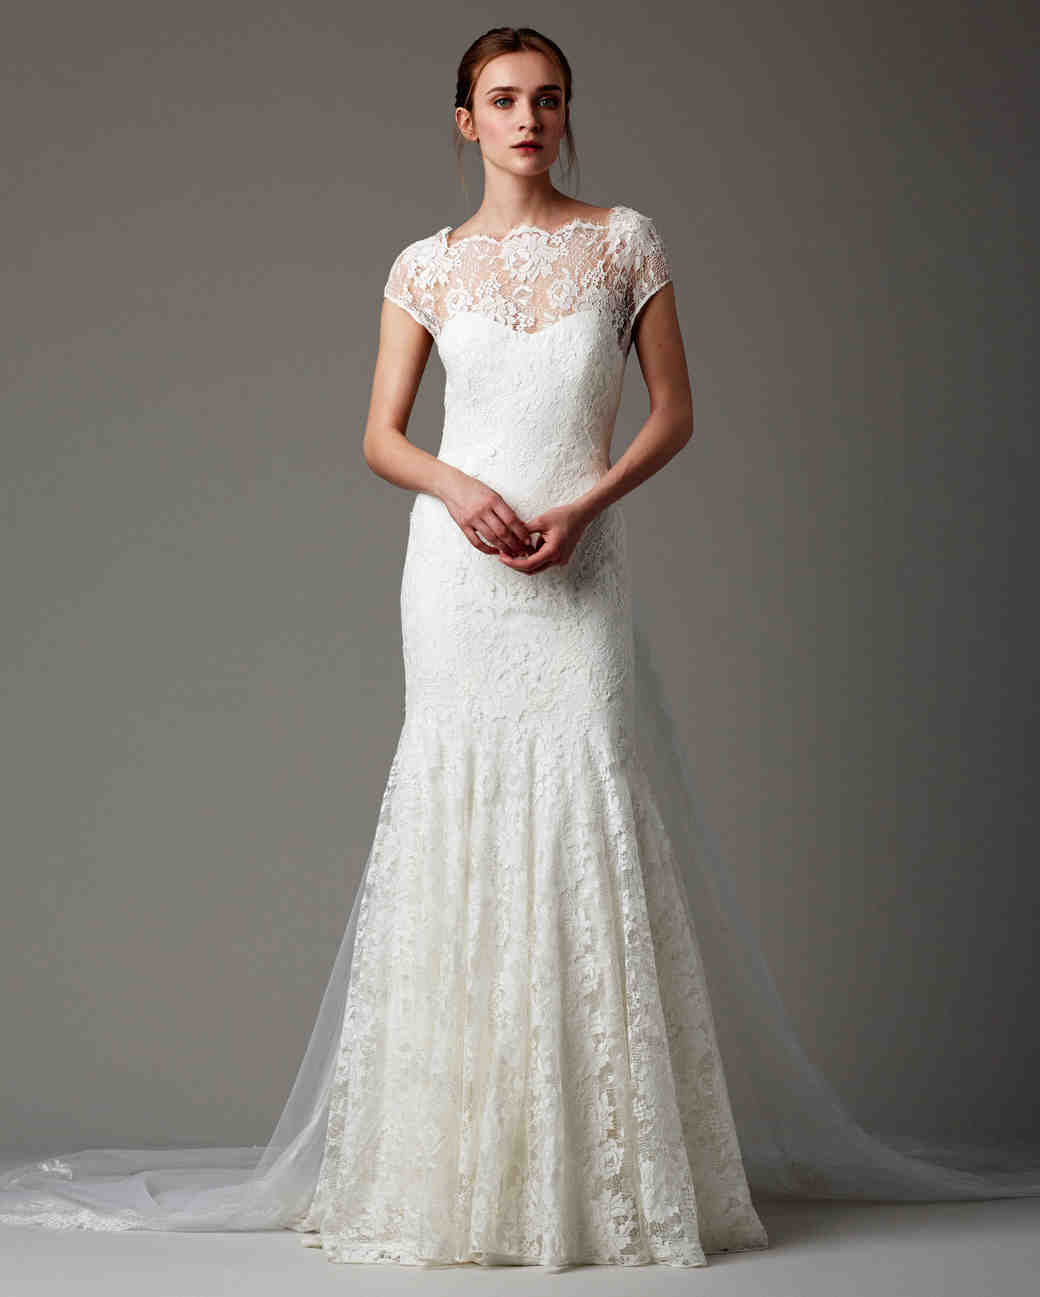 50 Wedding Dresses for Every Bride’s State Pride Martha